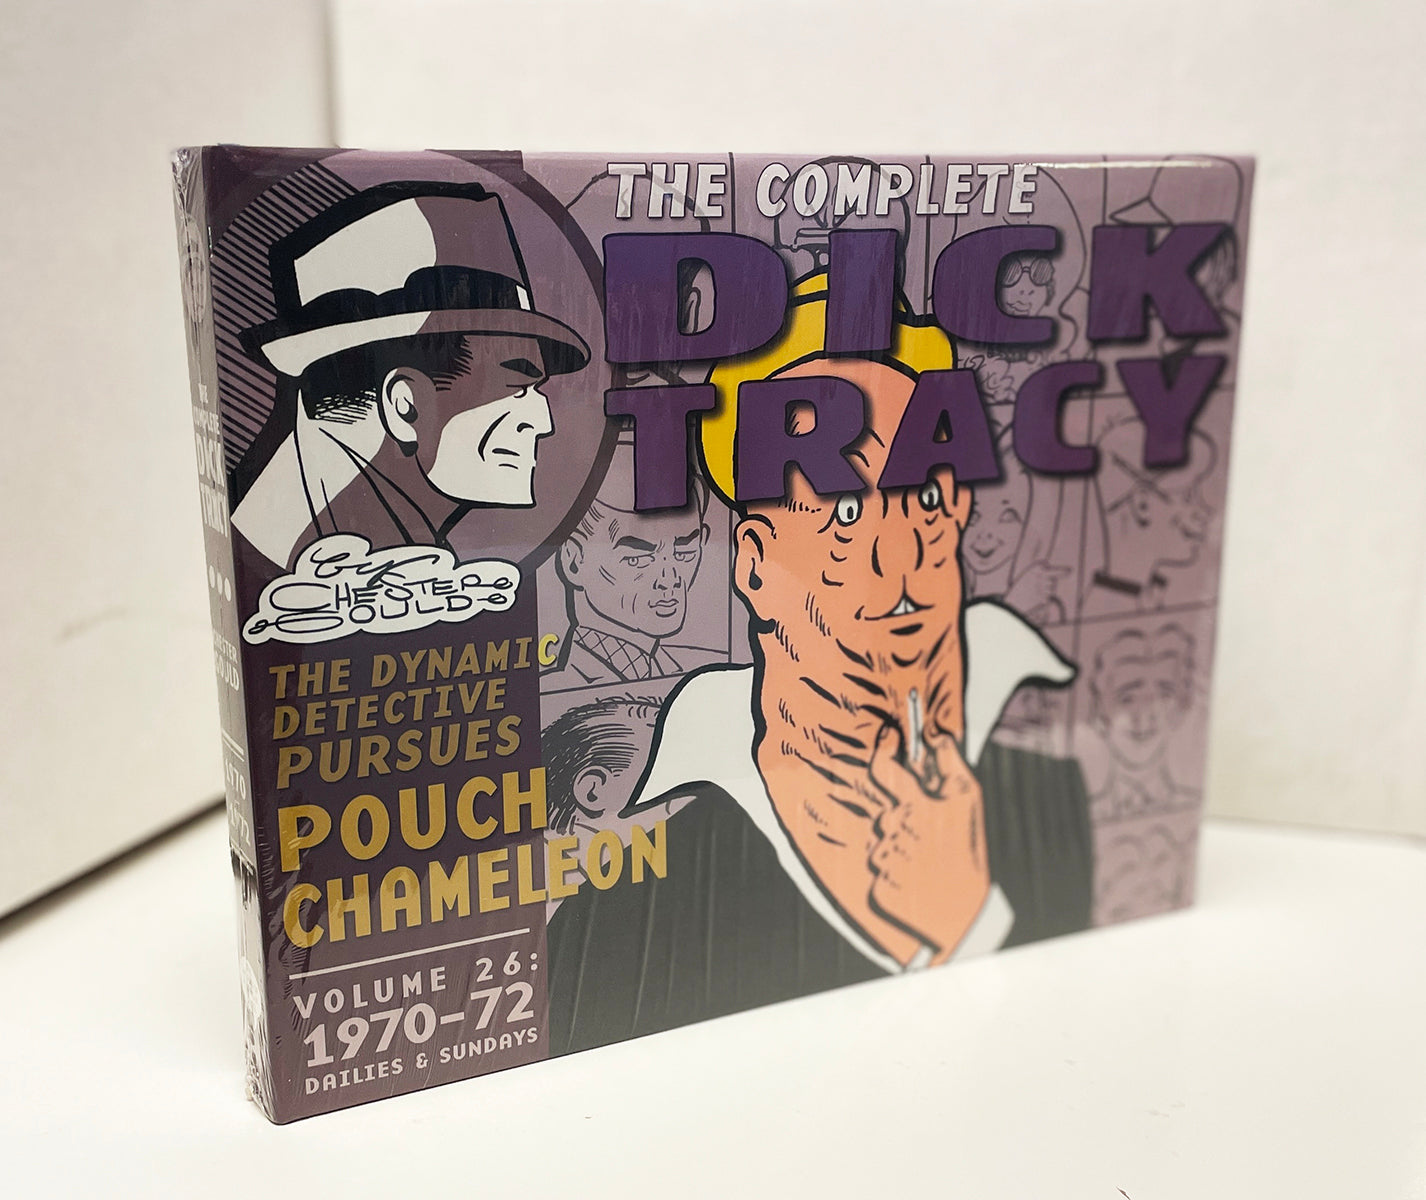 The Complete Dick Tracy Vol. 26 (IDW)